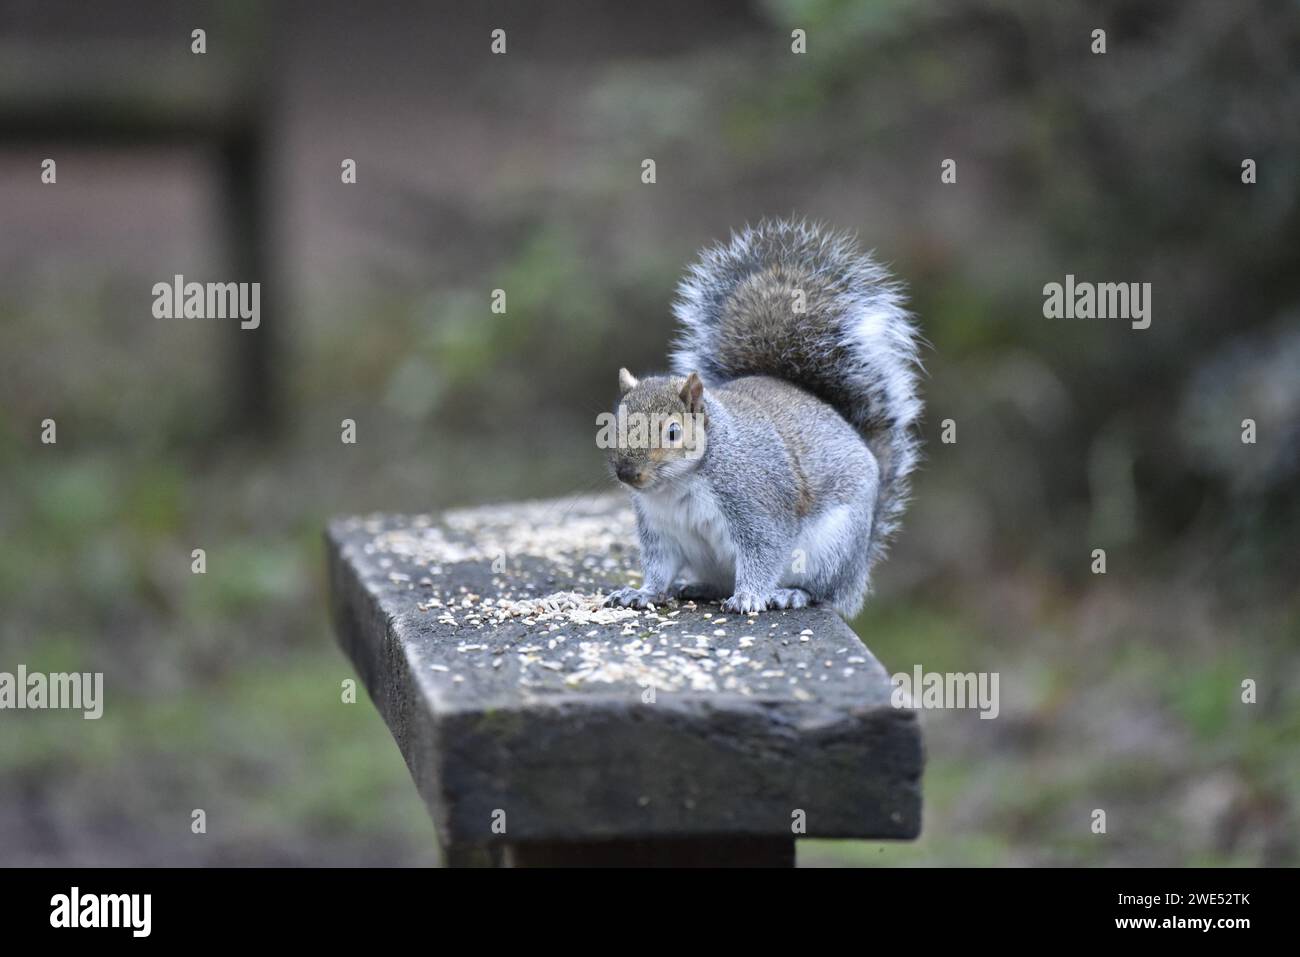 Eastern Gray Squirrel (Sciurus carolinensis) Crouching on a Wooden Bench Covered with Seed, Facing Camera with Bushy Tailed Curled Over Back, in UK Stock Photo